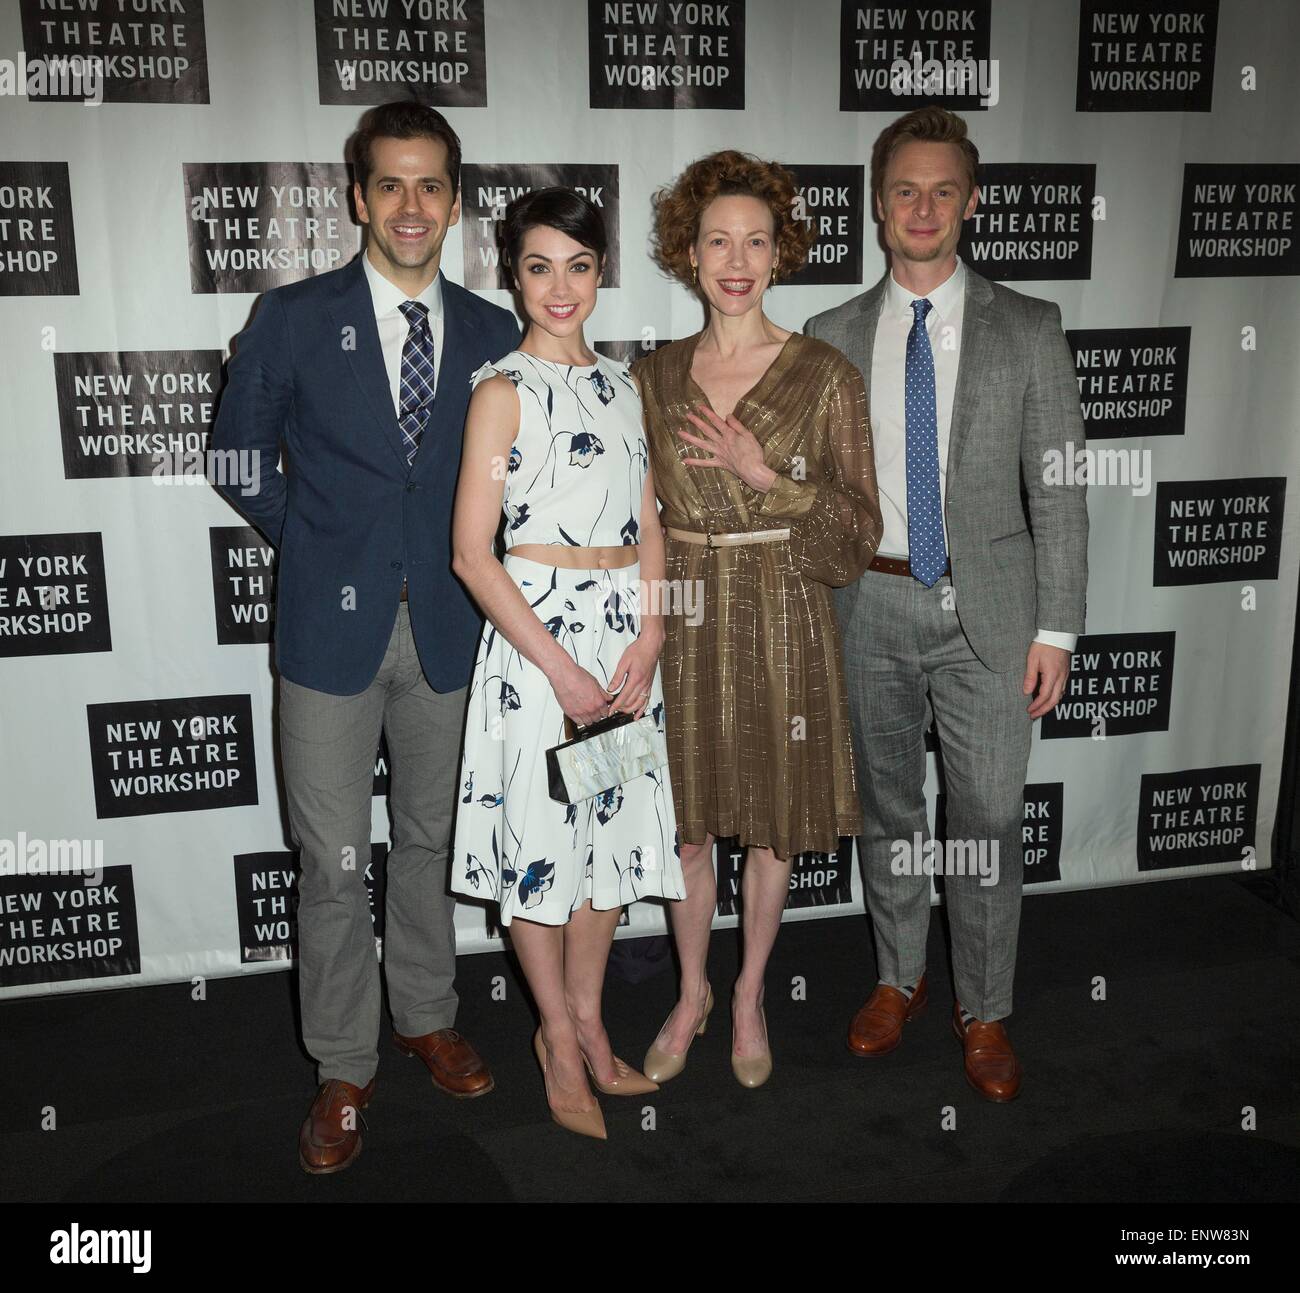 New York, NY, USA. 11th May, 2015. Robert Fairchild, Leanne Cope, Veanne Cox, Christopher Wheeldon at arrivals for New York Theatre Workshop (NYTW) 2015 Spring Gala, The Edison Ballroom, New York, NY May 11, 2015. Credit:  Lev Radin/Everett Collection/Alamy Live News Stock Photo